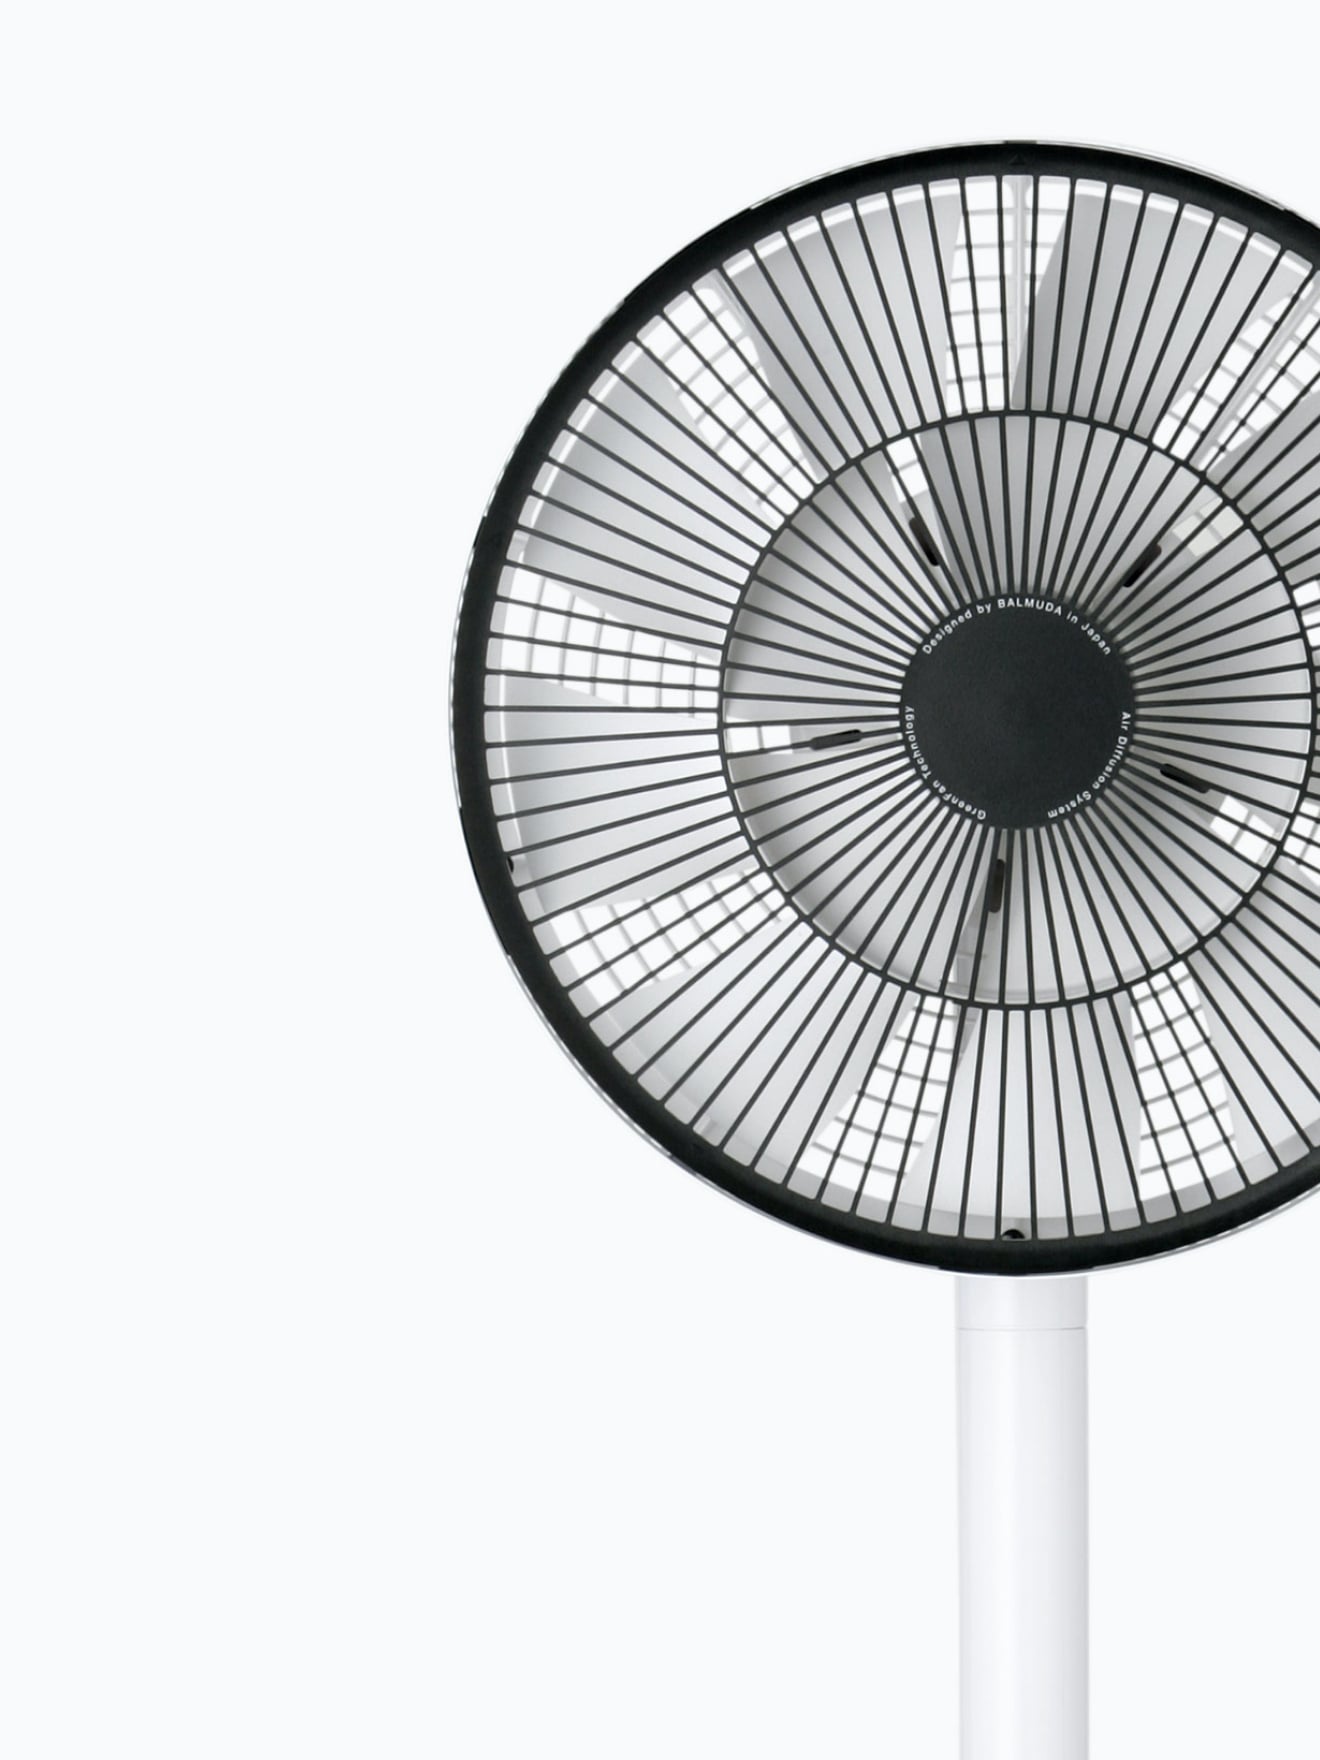 Reinventing the fan